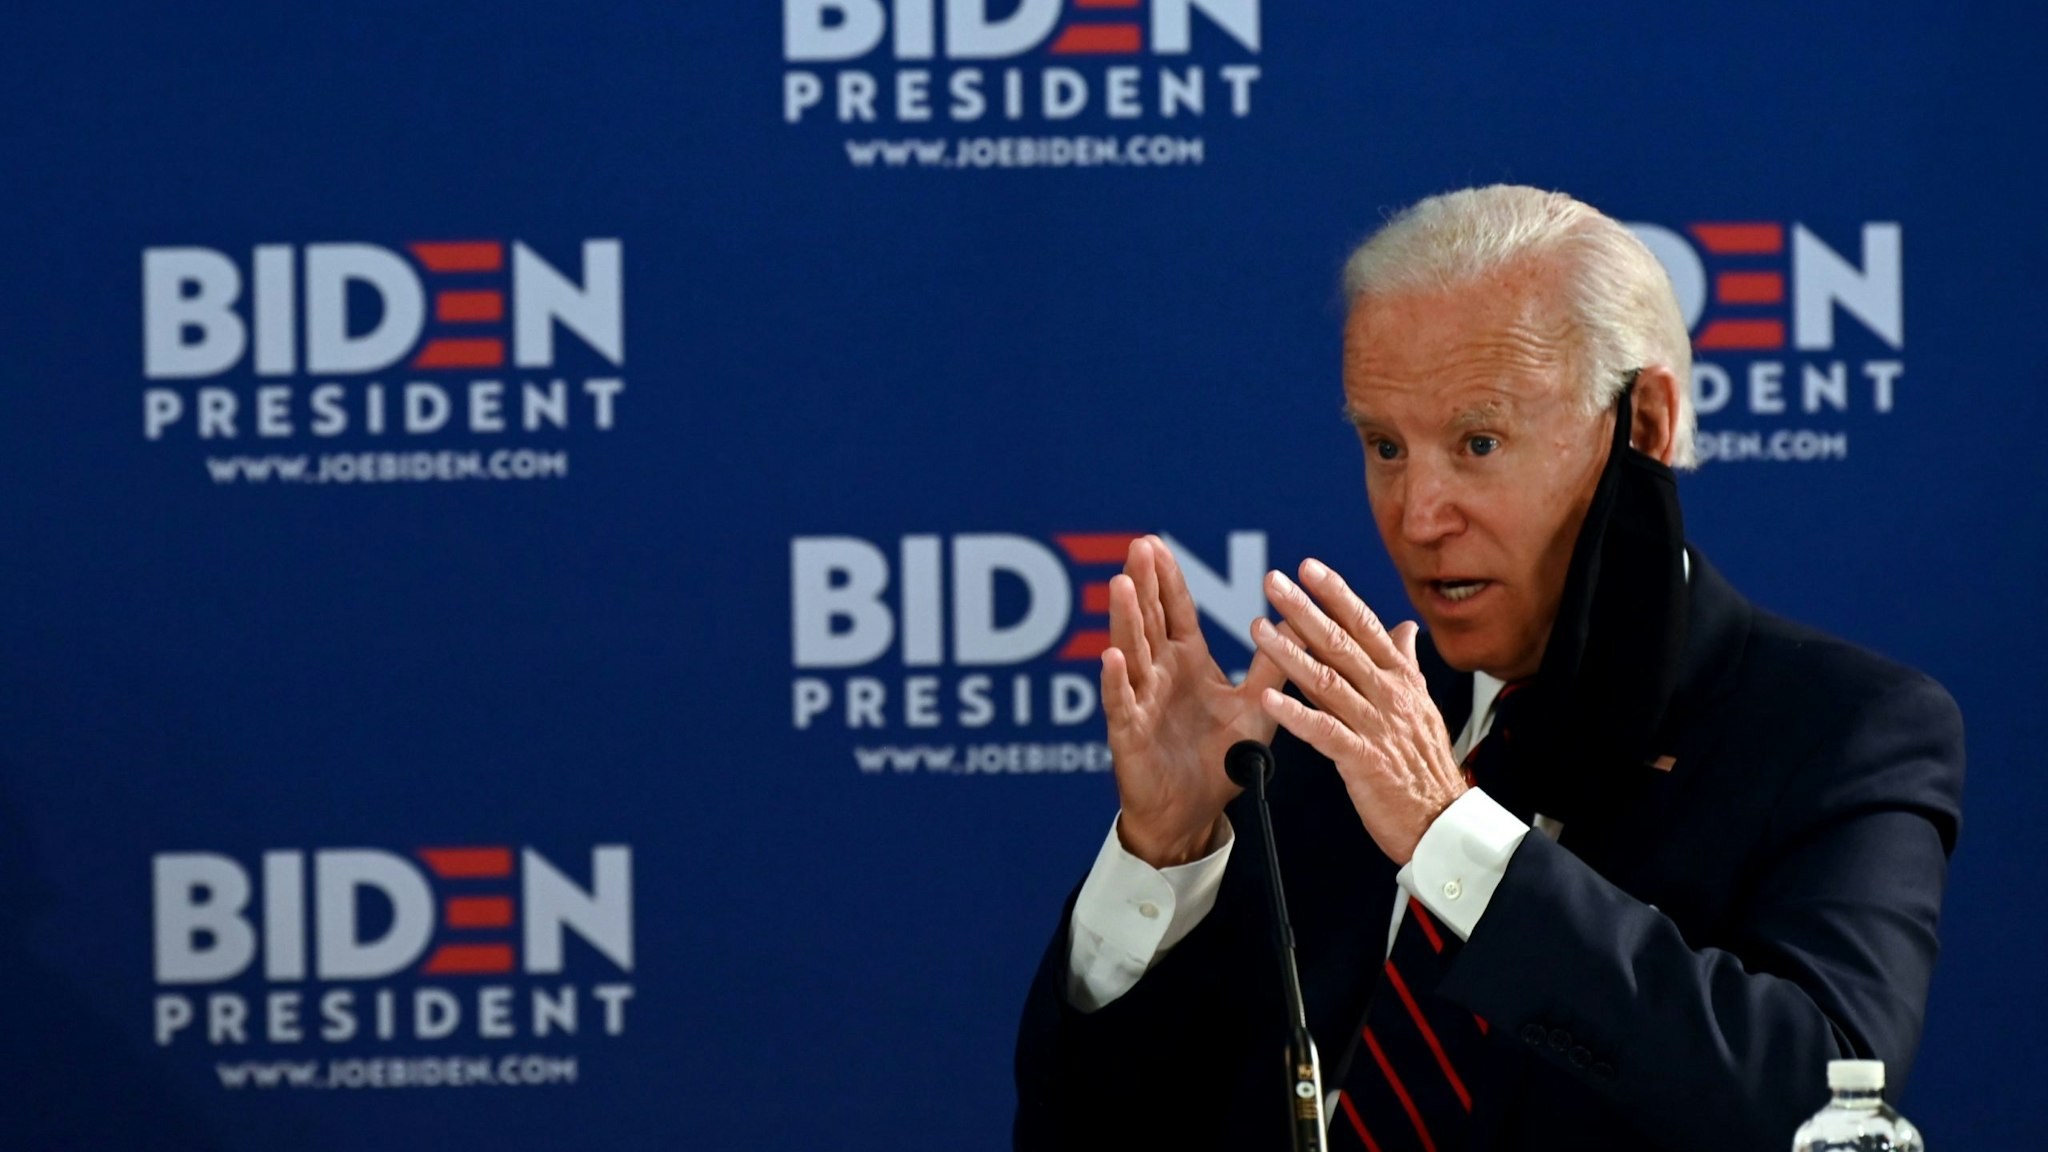 Democratic presidential candidate Joe Biden holds a roundtable meeting on reopening the economy with community leaders at the Enterprise Center in Philadelphia, Pennsylvania, on June 11, 2020. (Photo by JIM WATSON / AFP) (Photo by JIM WATSON/AFP via Getty Images)